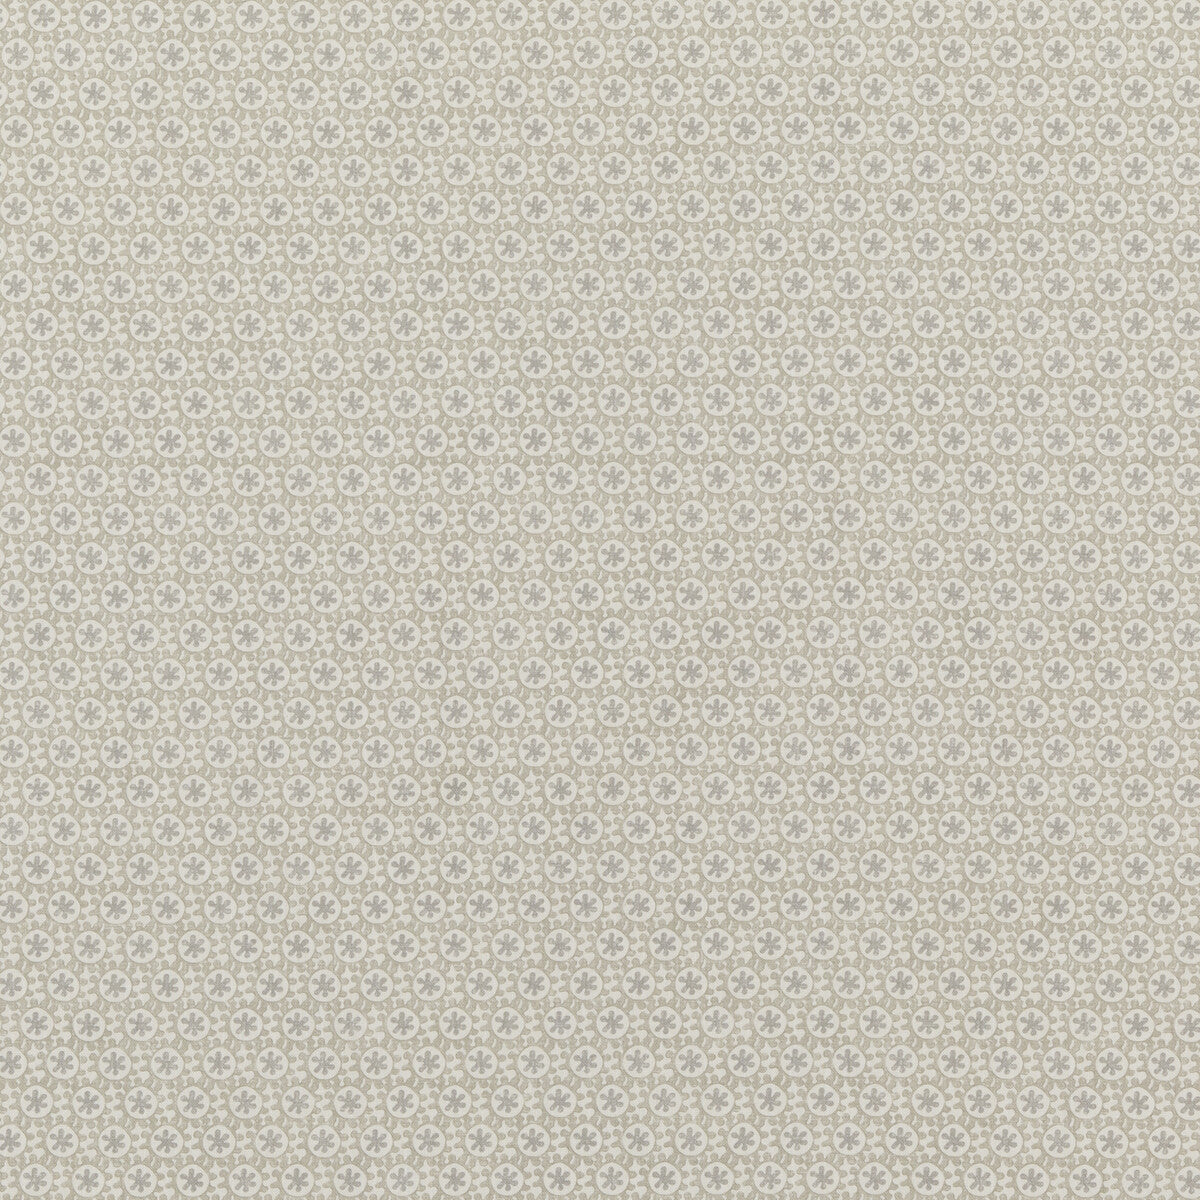 Oreto fabric in stone color - pattern PP50447.2.0 - by Baker Lifestyle in the Homes &amp; Gardens III collection